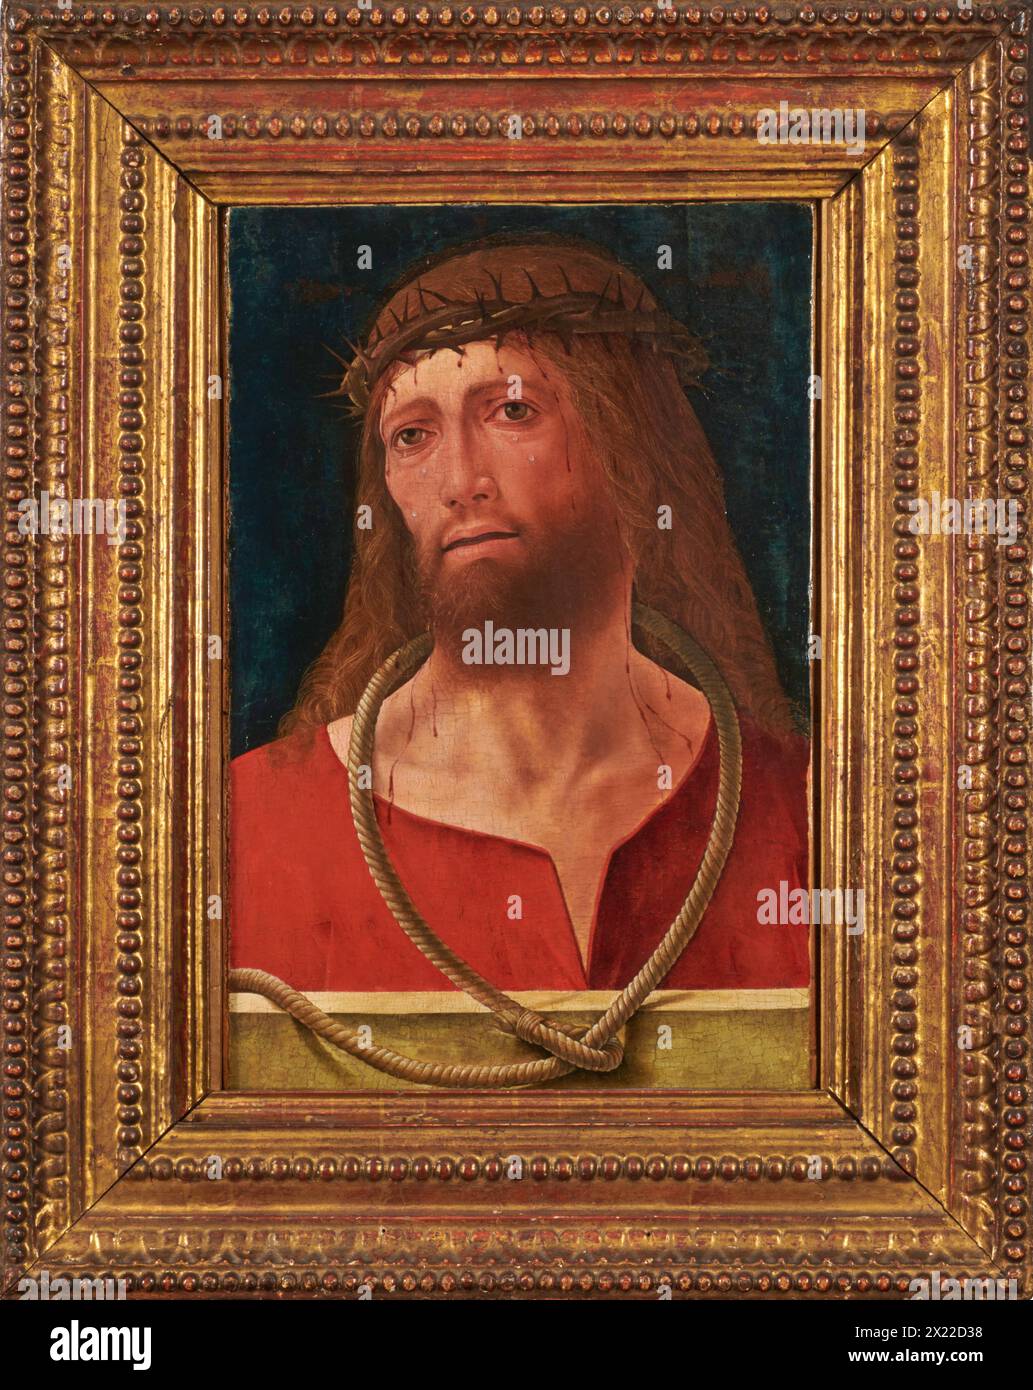 Christ Crowned With Thorns, c1479-80. Jesus is shown with a rope knotted around his neck and a crown of thorns on his head, tears and blood trickling down his face. This stark, iconic image was intended to encourage meditation on Christ&#x2019;s suffering, calling to mind his mockery and abuse at the hands of Roman soldiers. Stock Photo